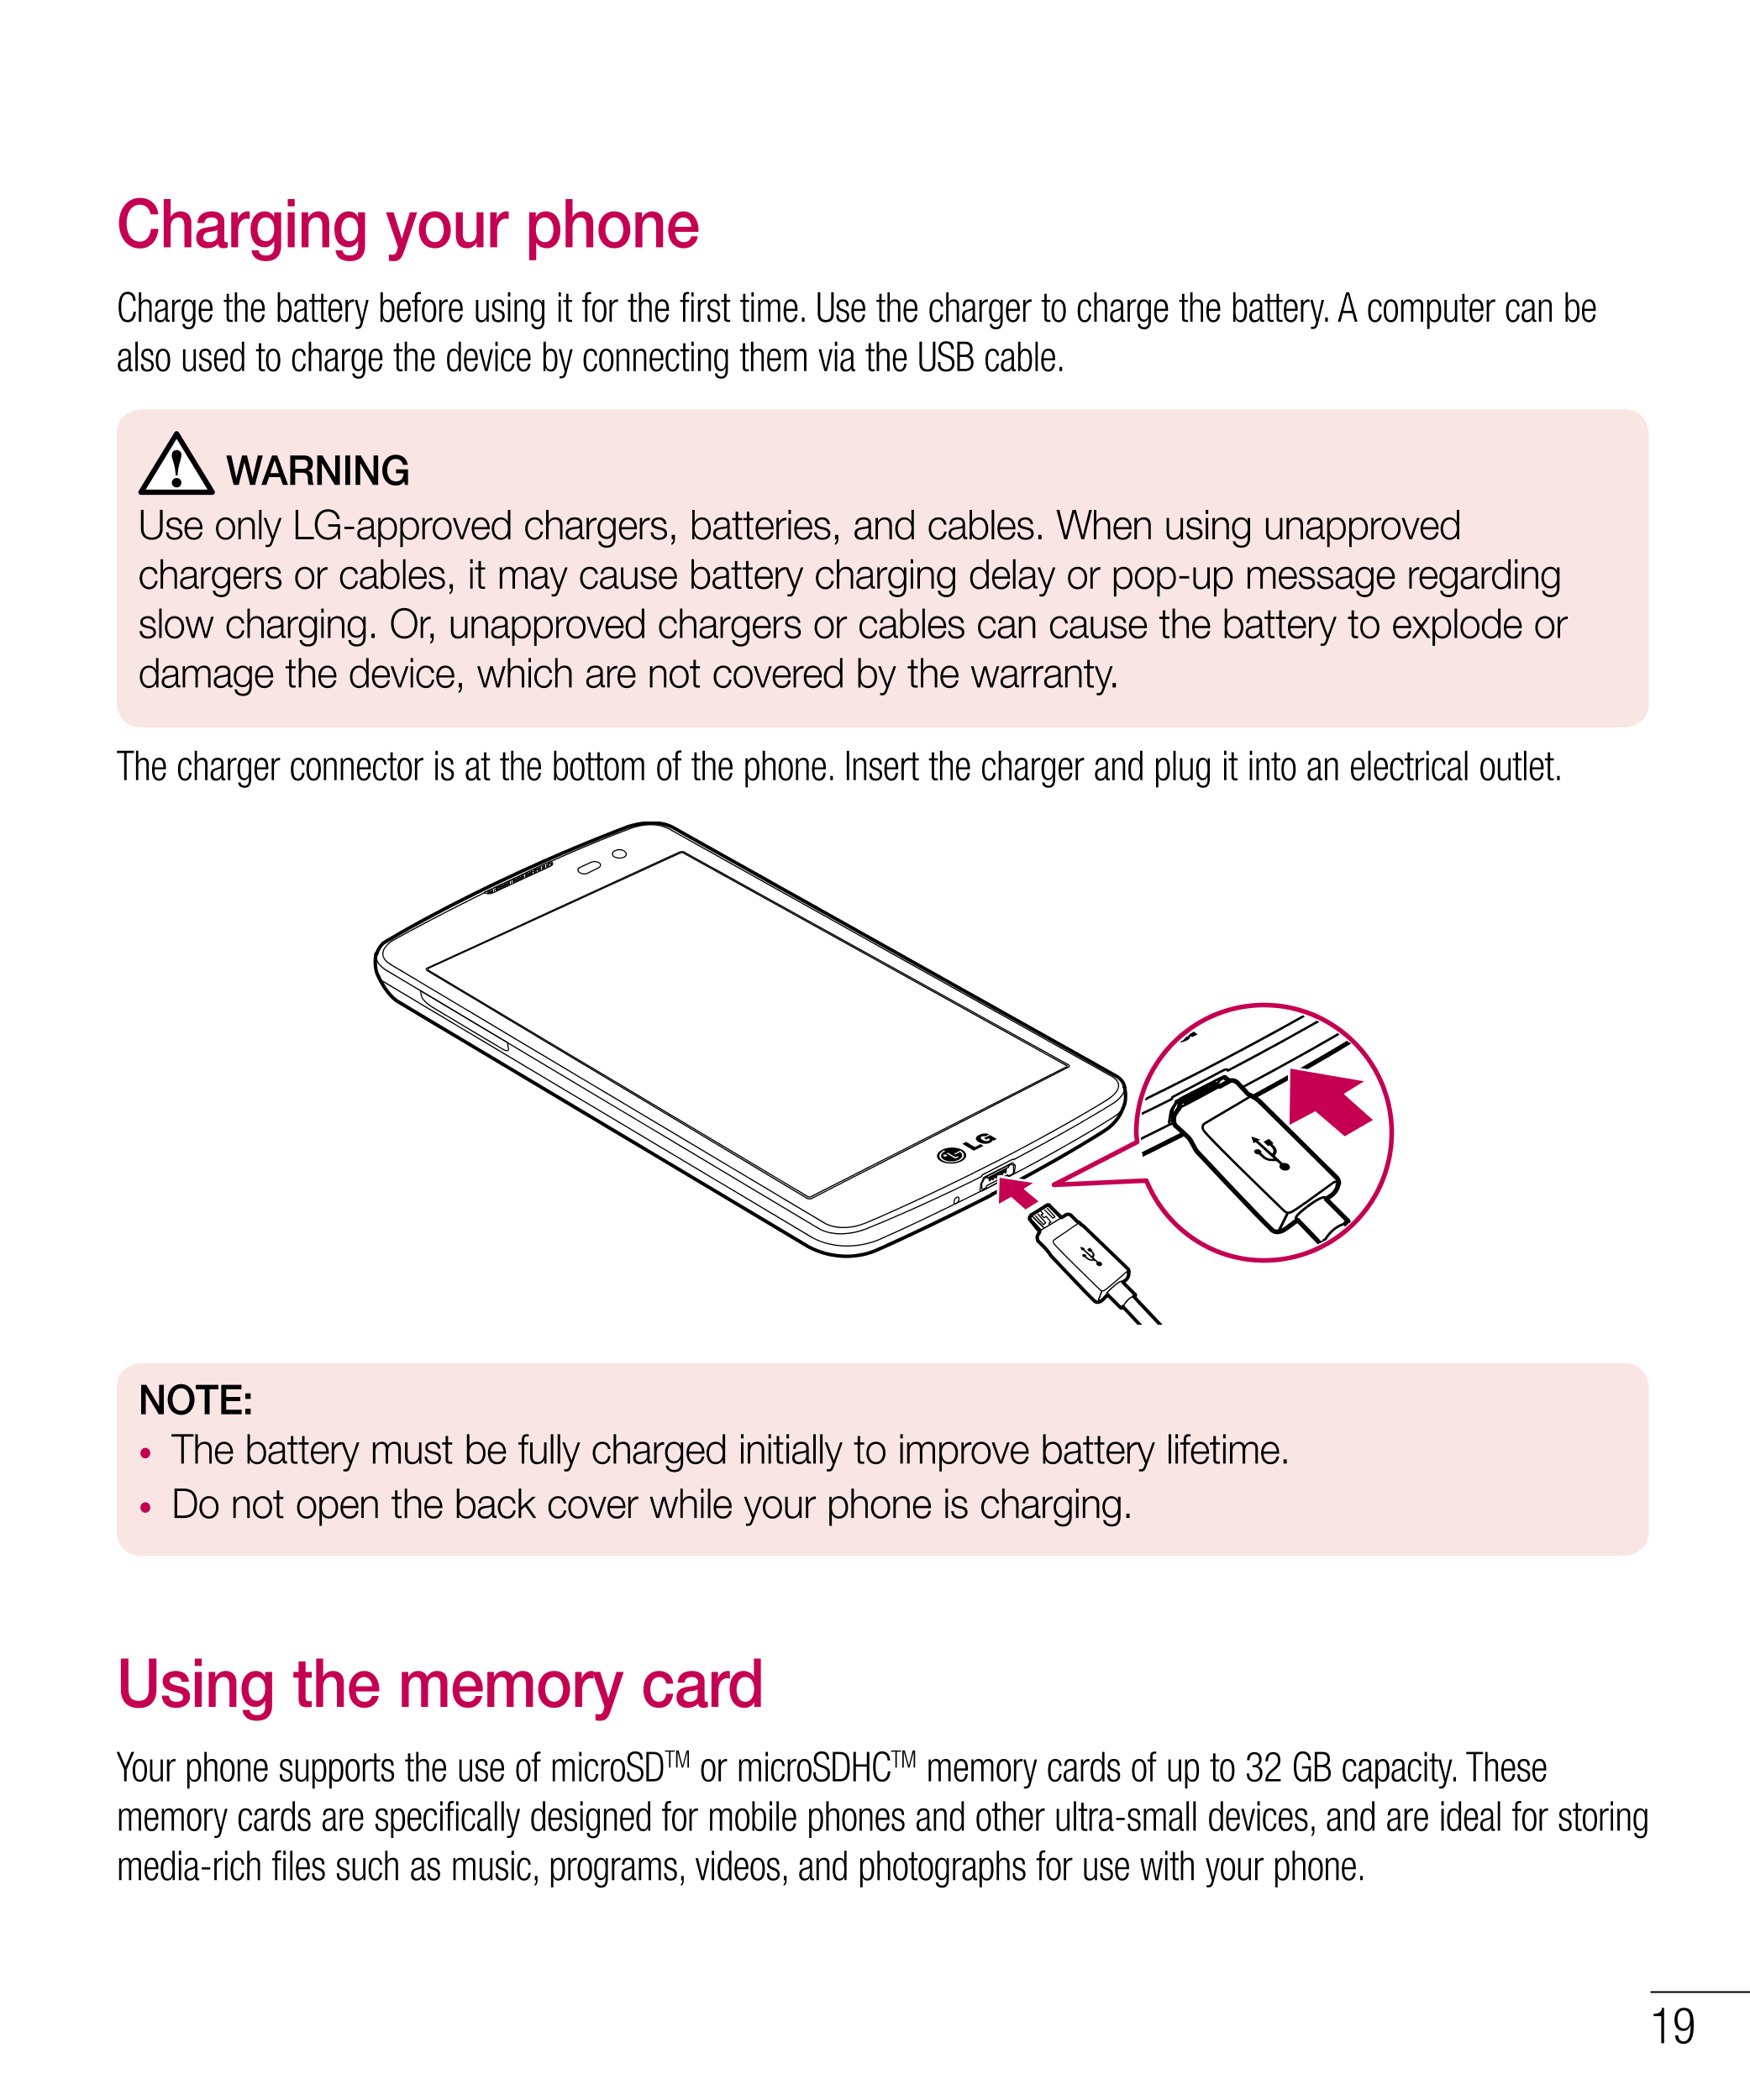 Charging your phone
Charge the battery before using it for the first time. Use the charger to charge the battery. A computer can